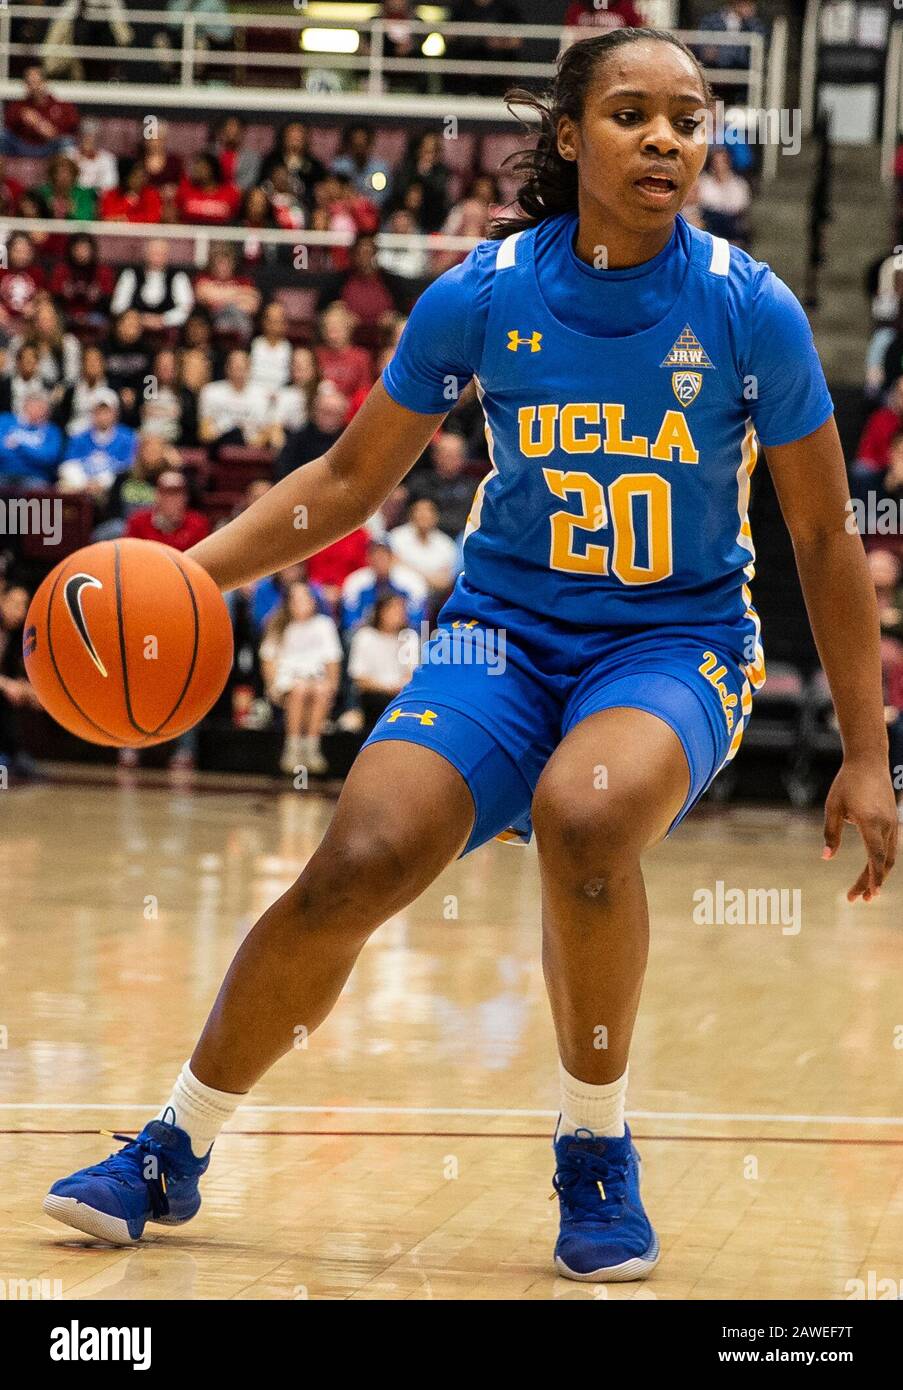 Stanford, CA, USA. 07th Feb, 2020. A. UCLA Bruins guard Charisma Osborne (20) looks to pass the ball during the NCAA Women's Basketball game between UCLA Bruins and the Stanford Cardinal 79-69 win at Maples Pavilion Stanford, CA. Thurman James /CSM/Alamy Live News Stock Photo